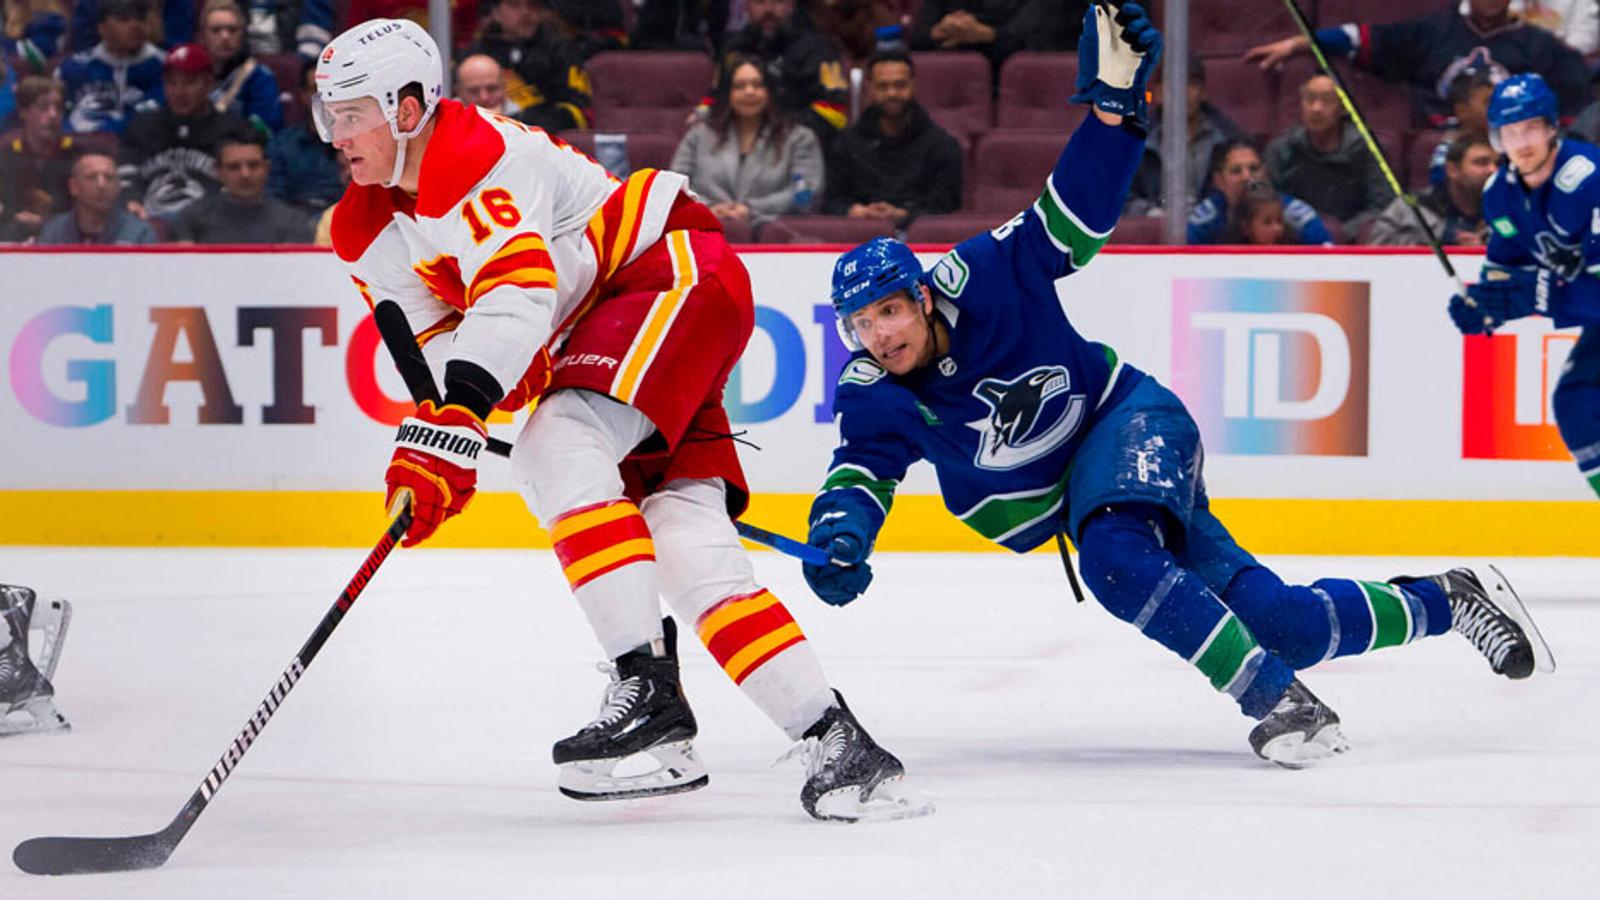 Canucks acquire Nikita Zadorov from Flames in rare trade between divisional rivals